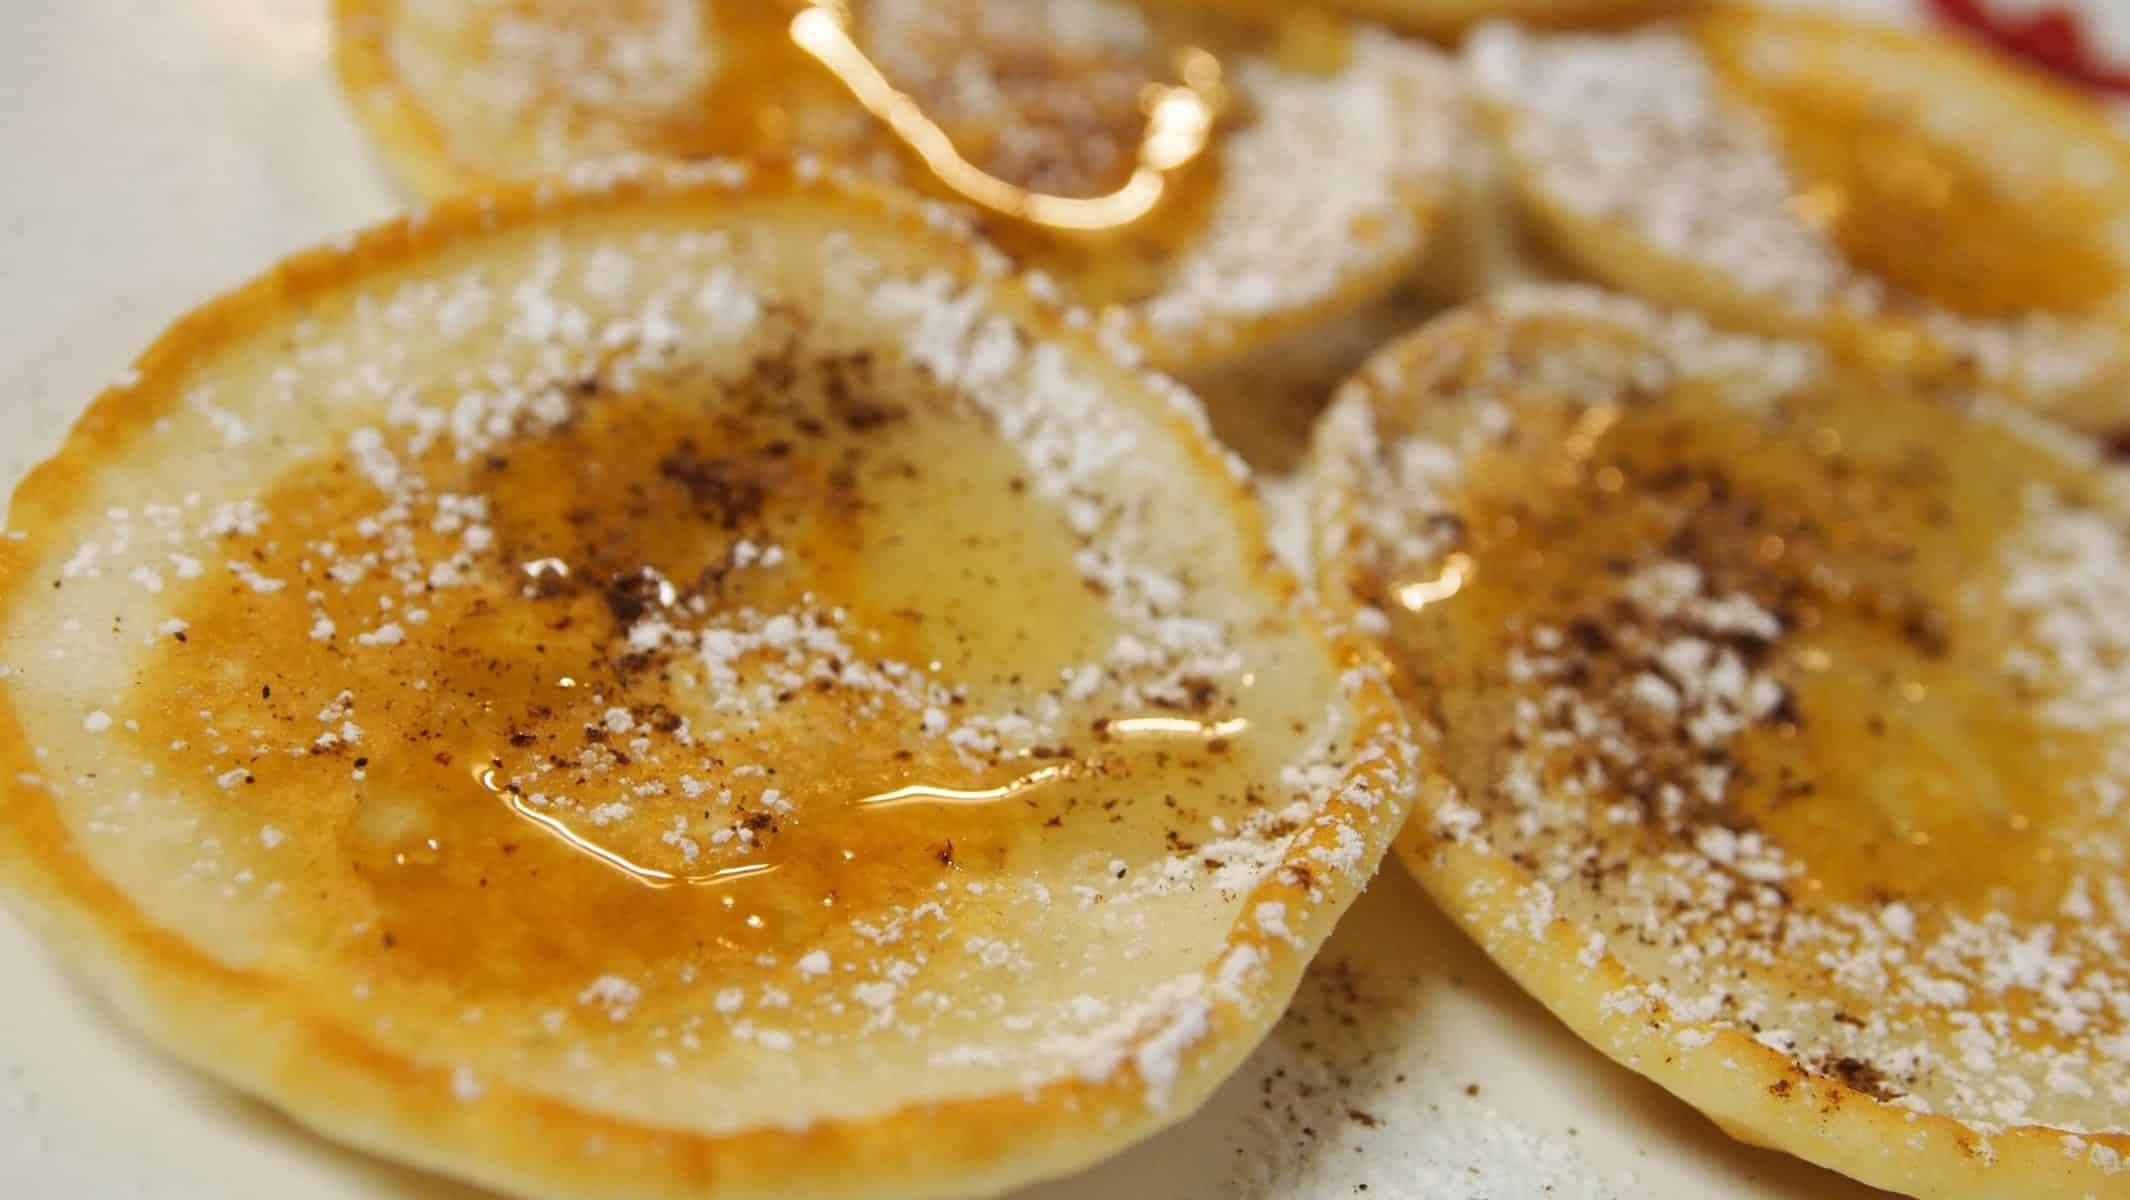  Make a stack of these fluffy pancakes and drizzle generously with honey for the ultimate indulgence.